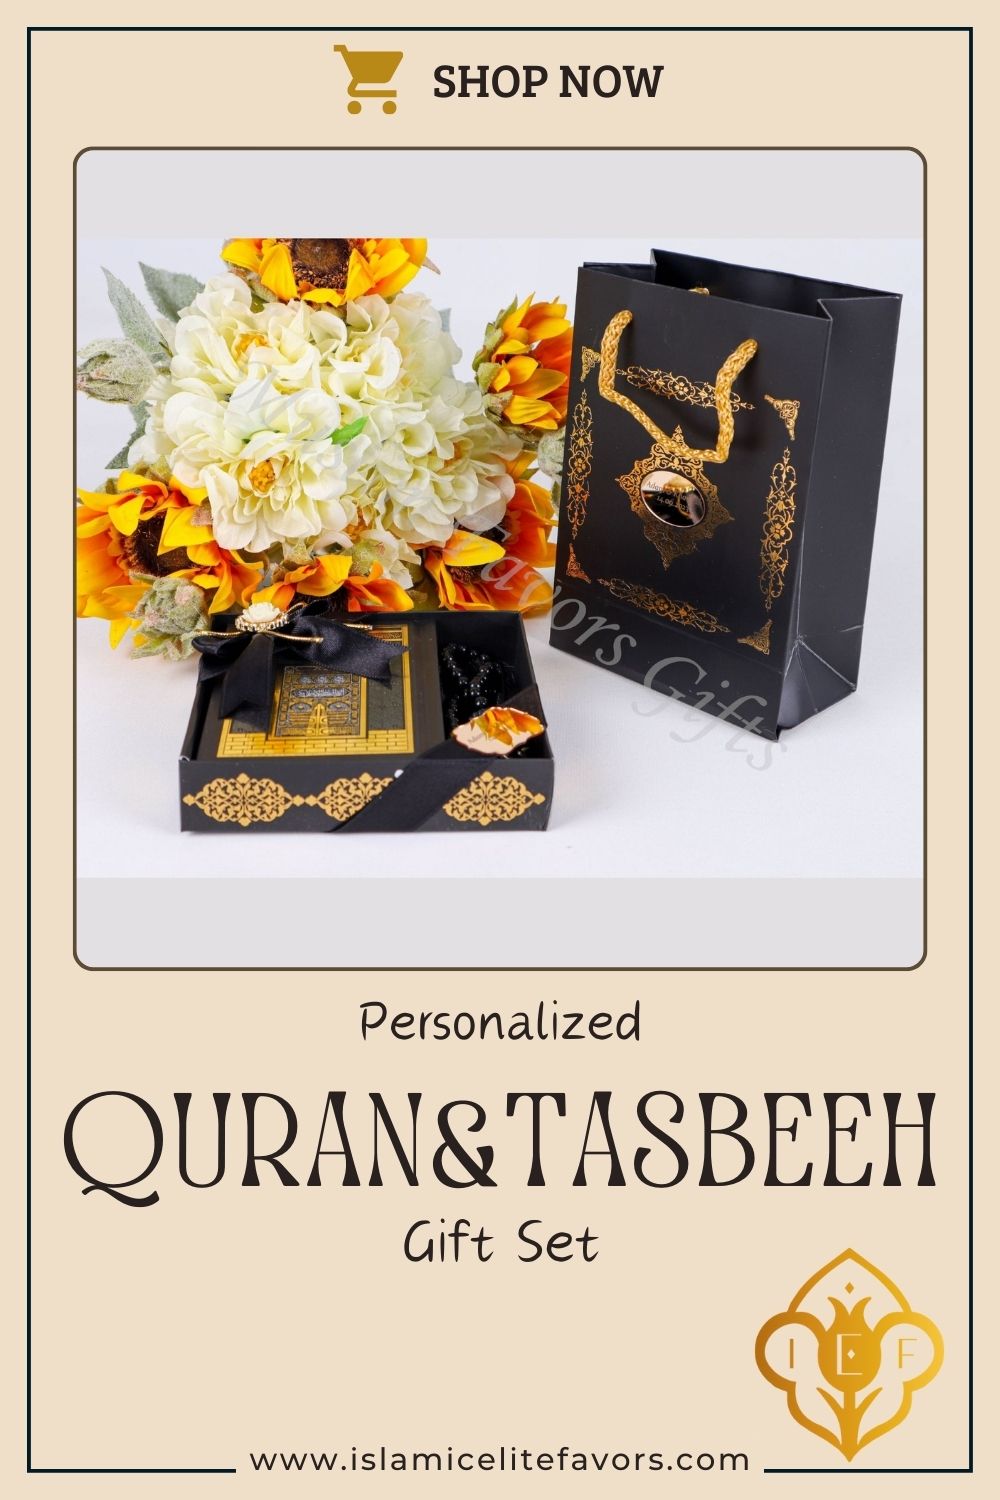 Celebrate love and faith with our exquisite Muslim wedding gifts. From  beautiful tasbeeh beads to meaningful Islamic favors, we have… | Instagram